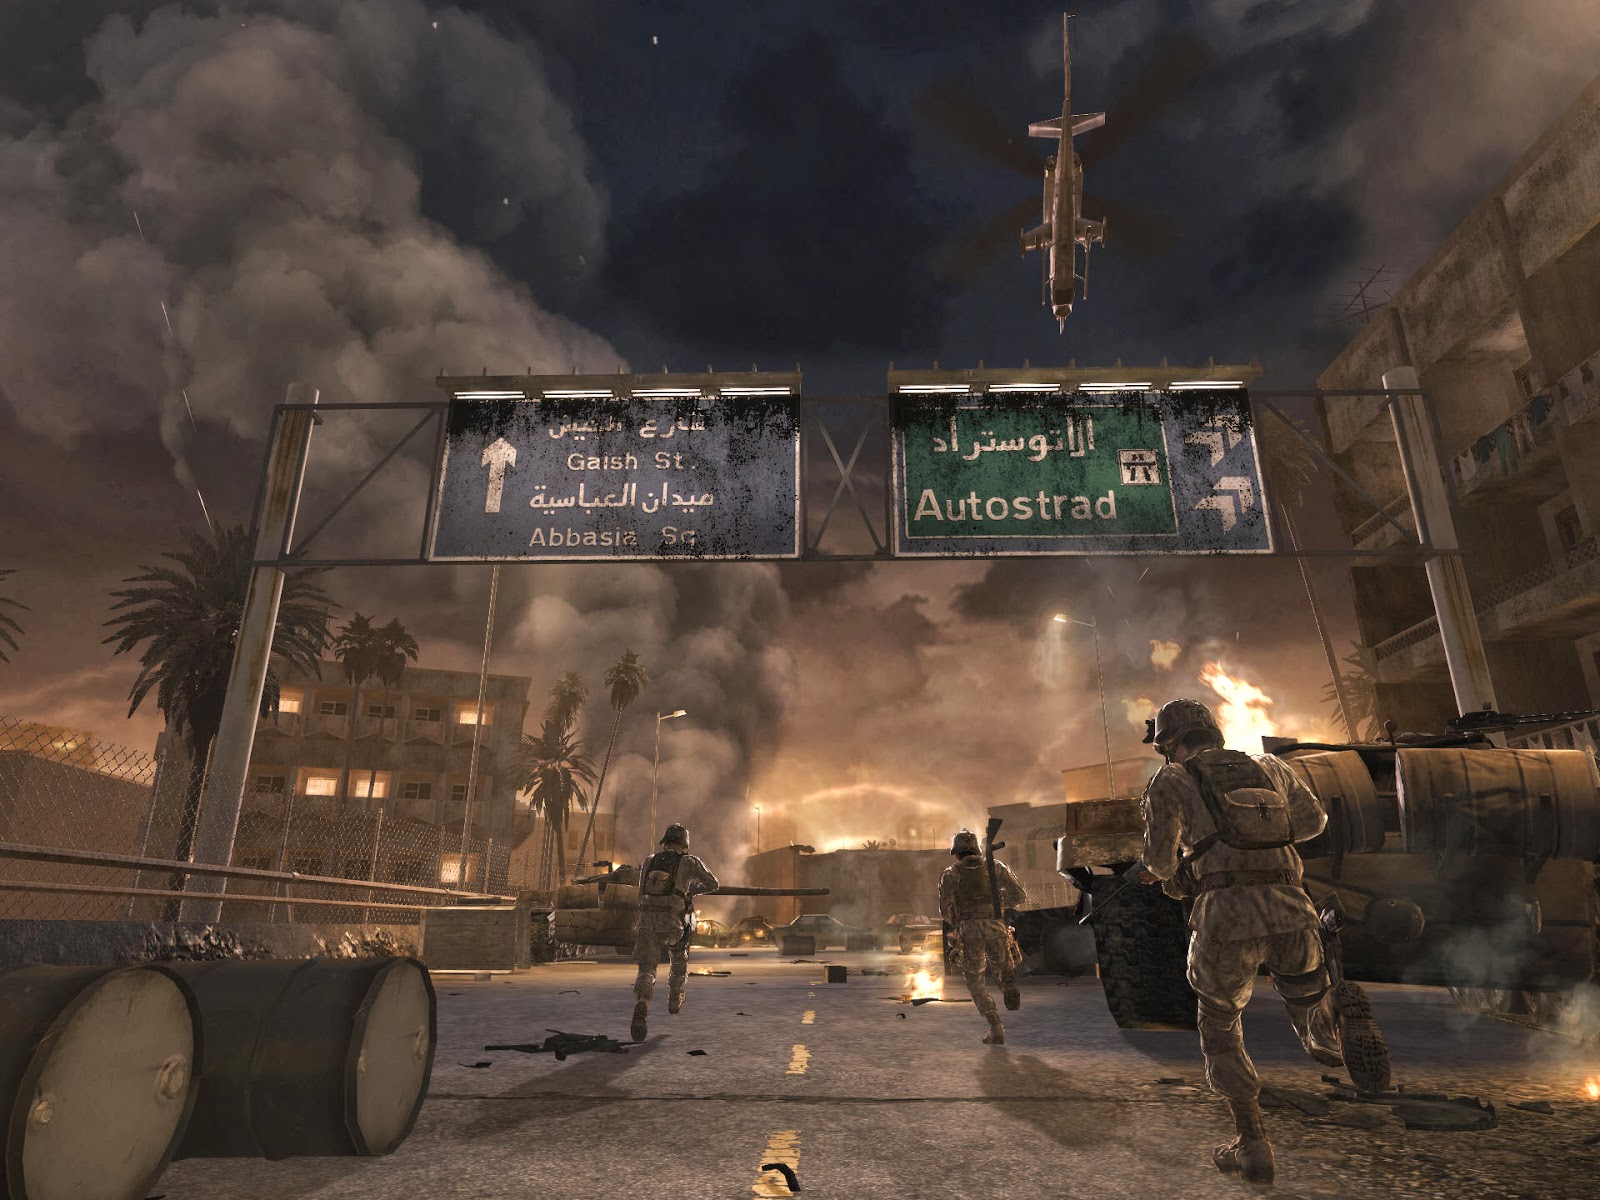 call of duty 4 modern warfare free download highly compressed